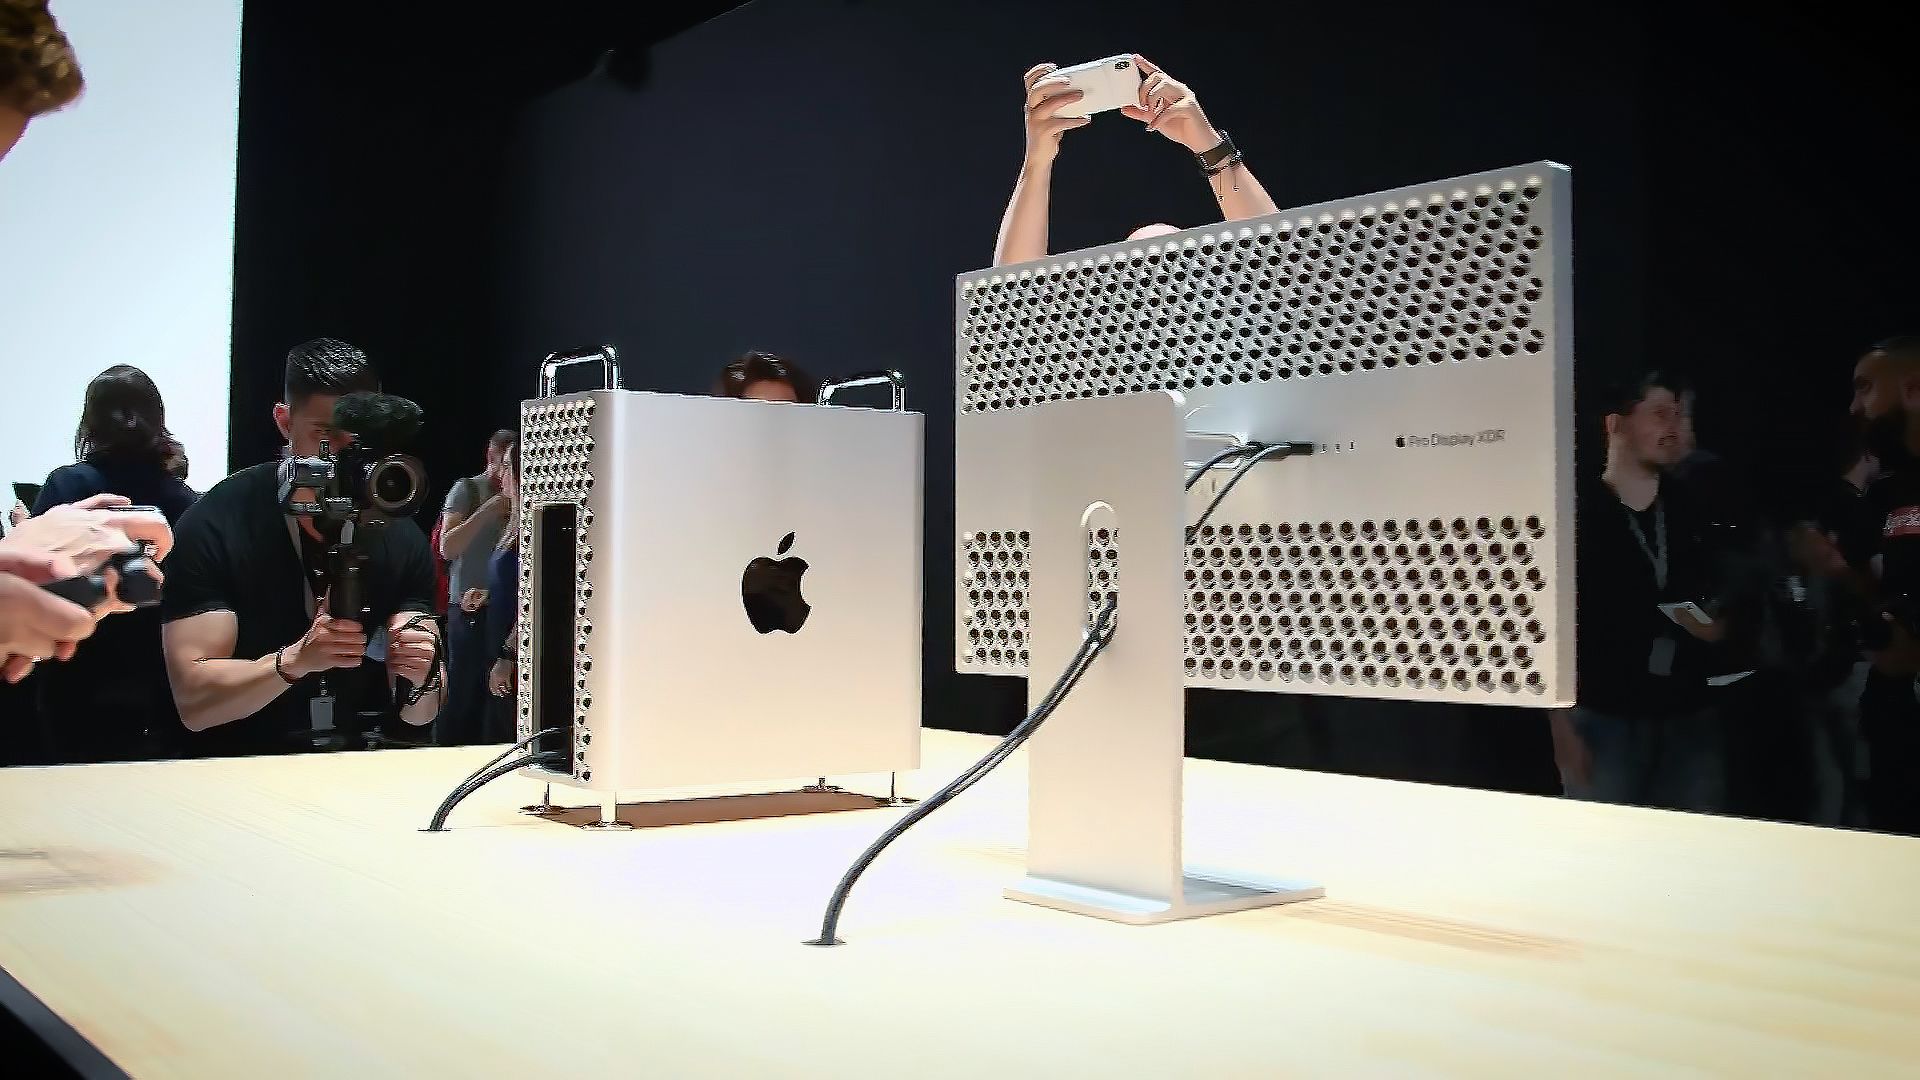 We want to continue making Mac Pro in U.S.